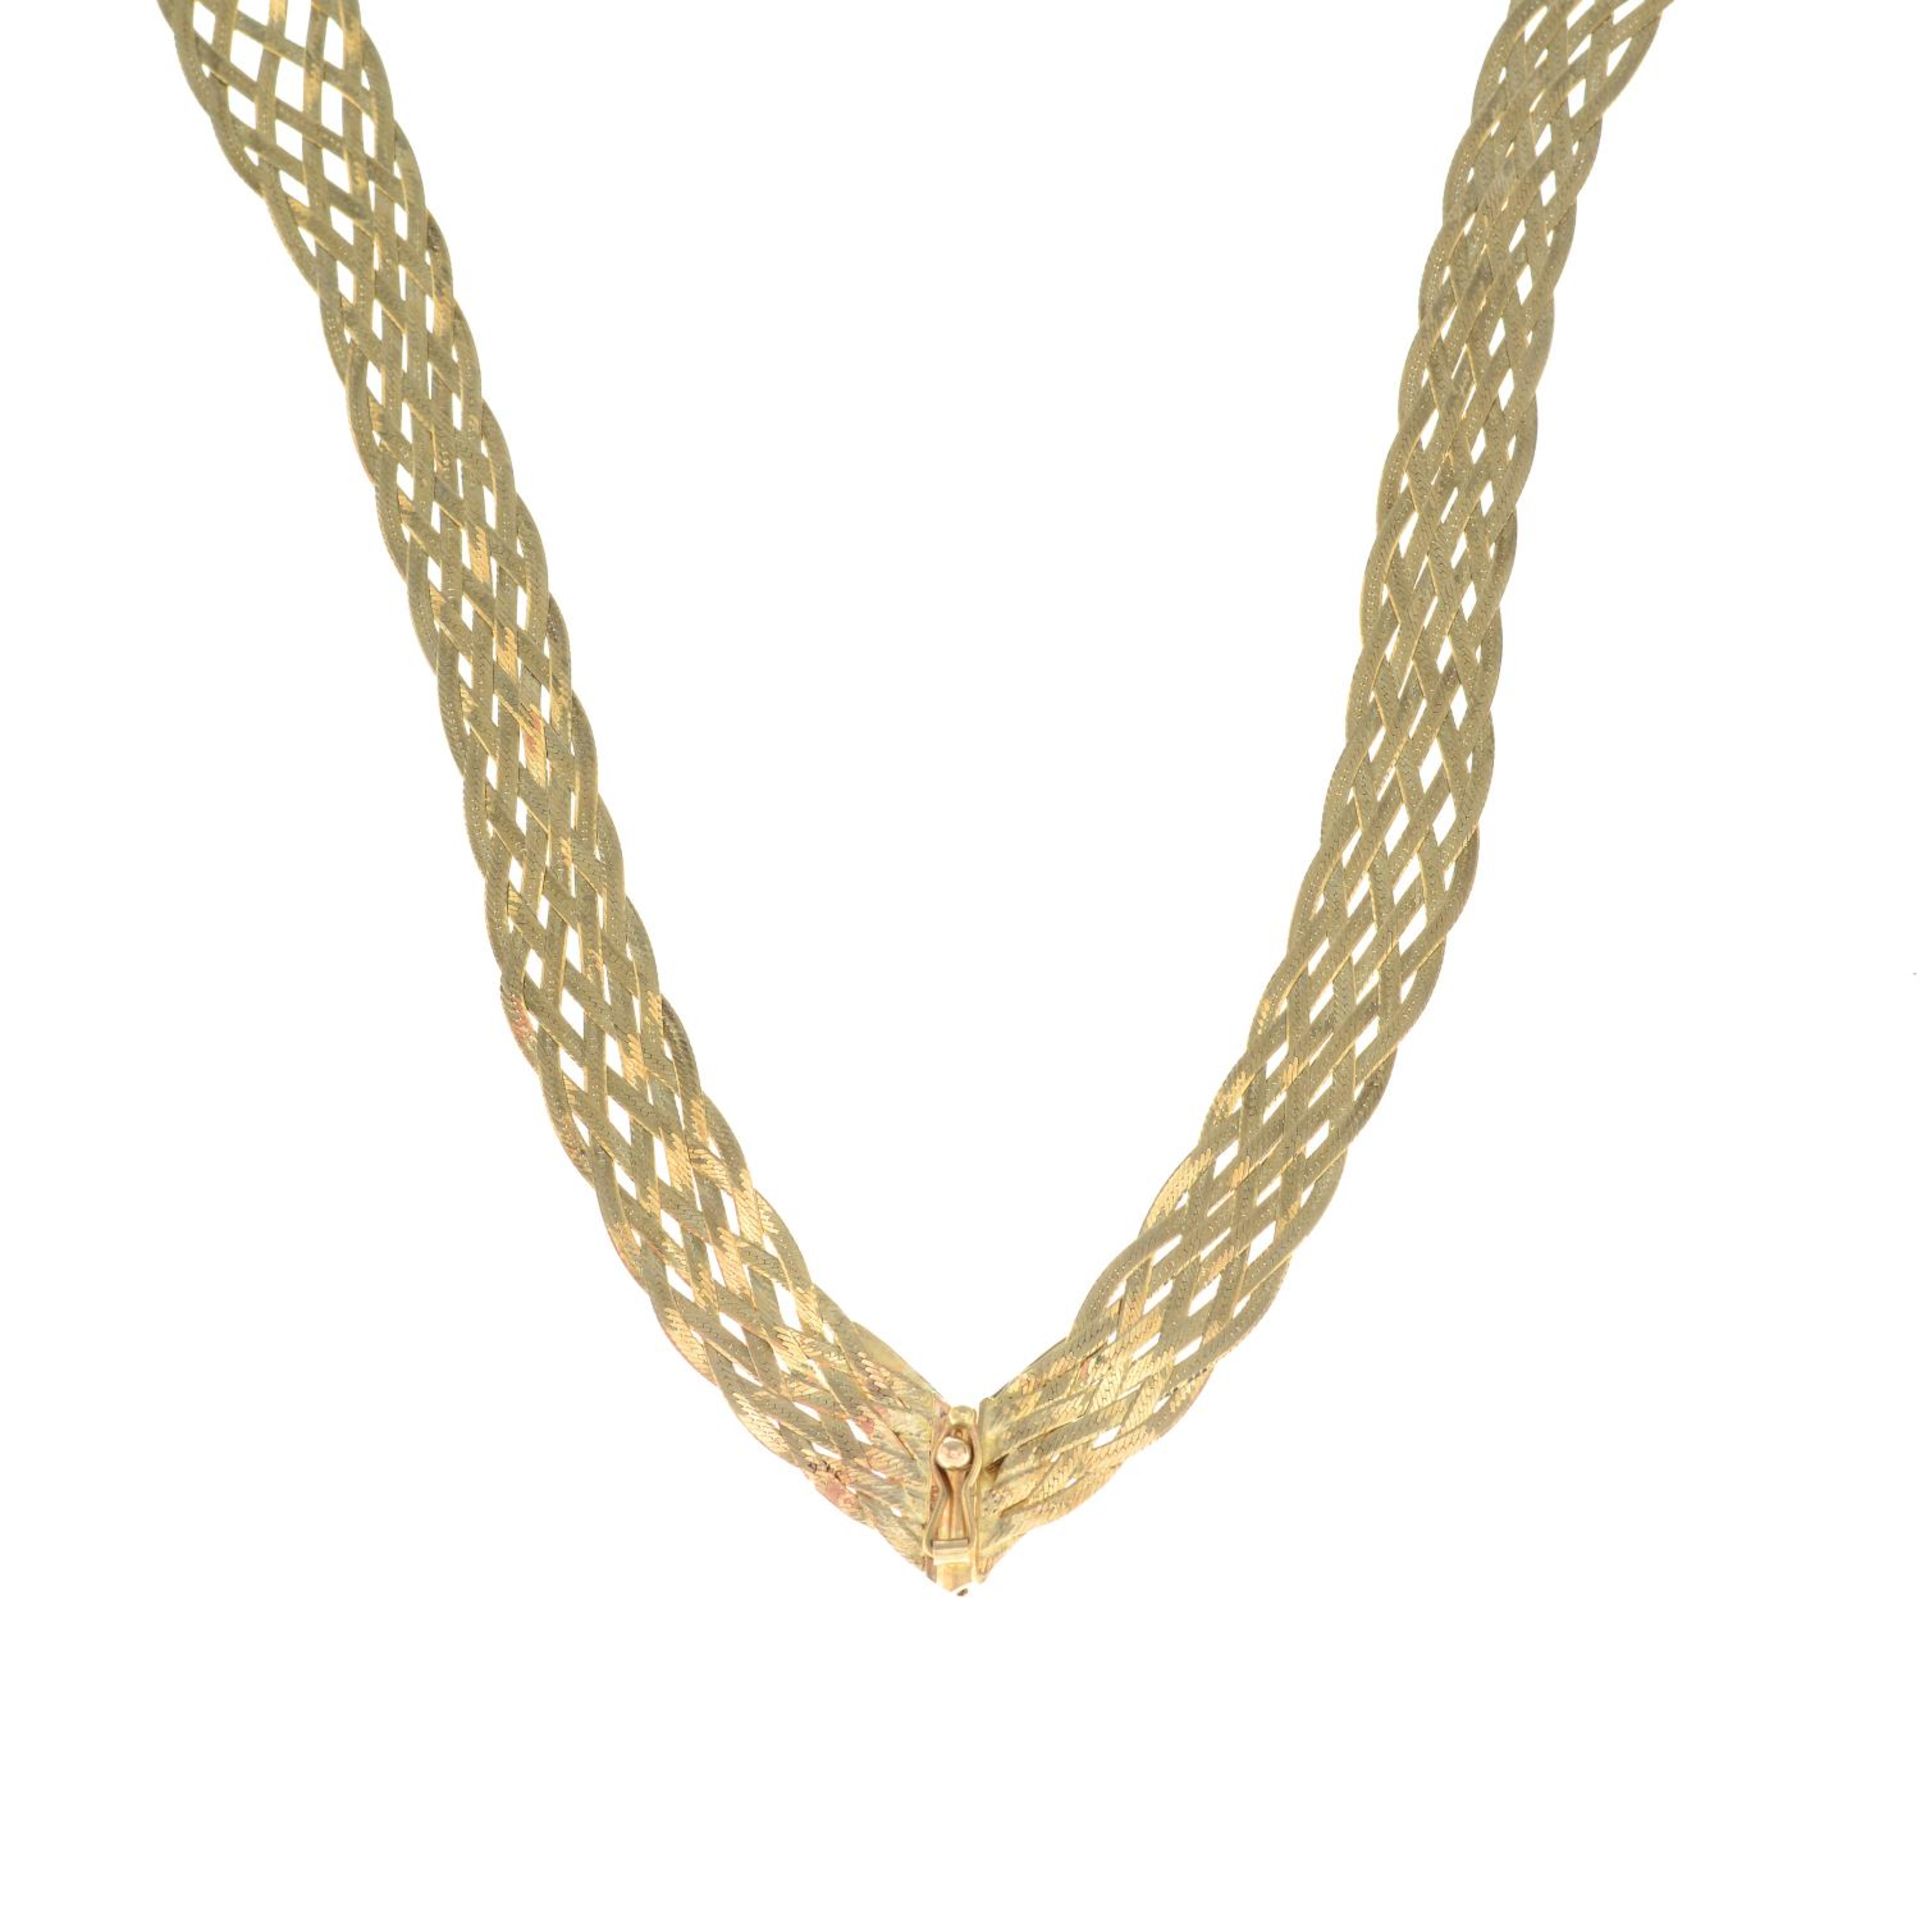 A 1990s 9ct gold woven necklace.Import marks for Birmingham, 1990.